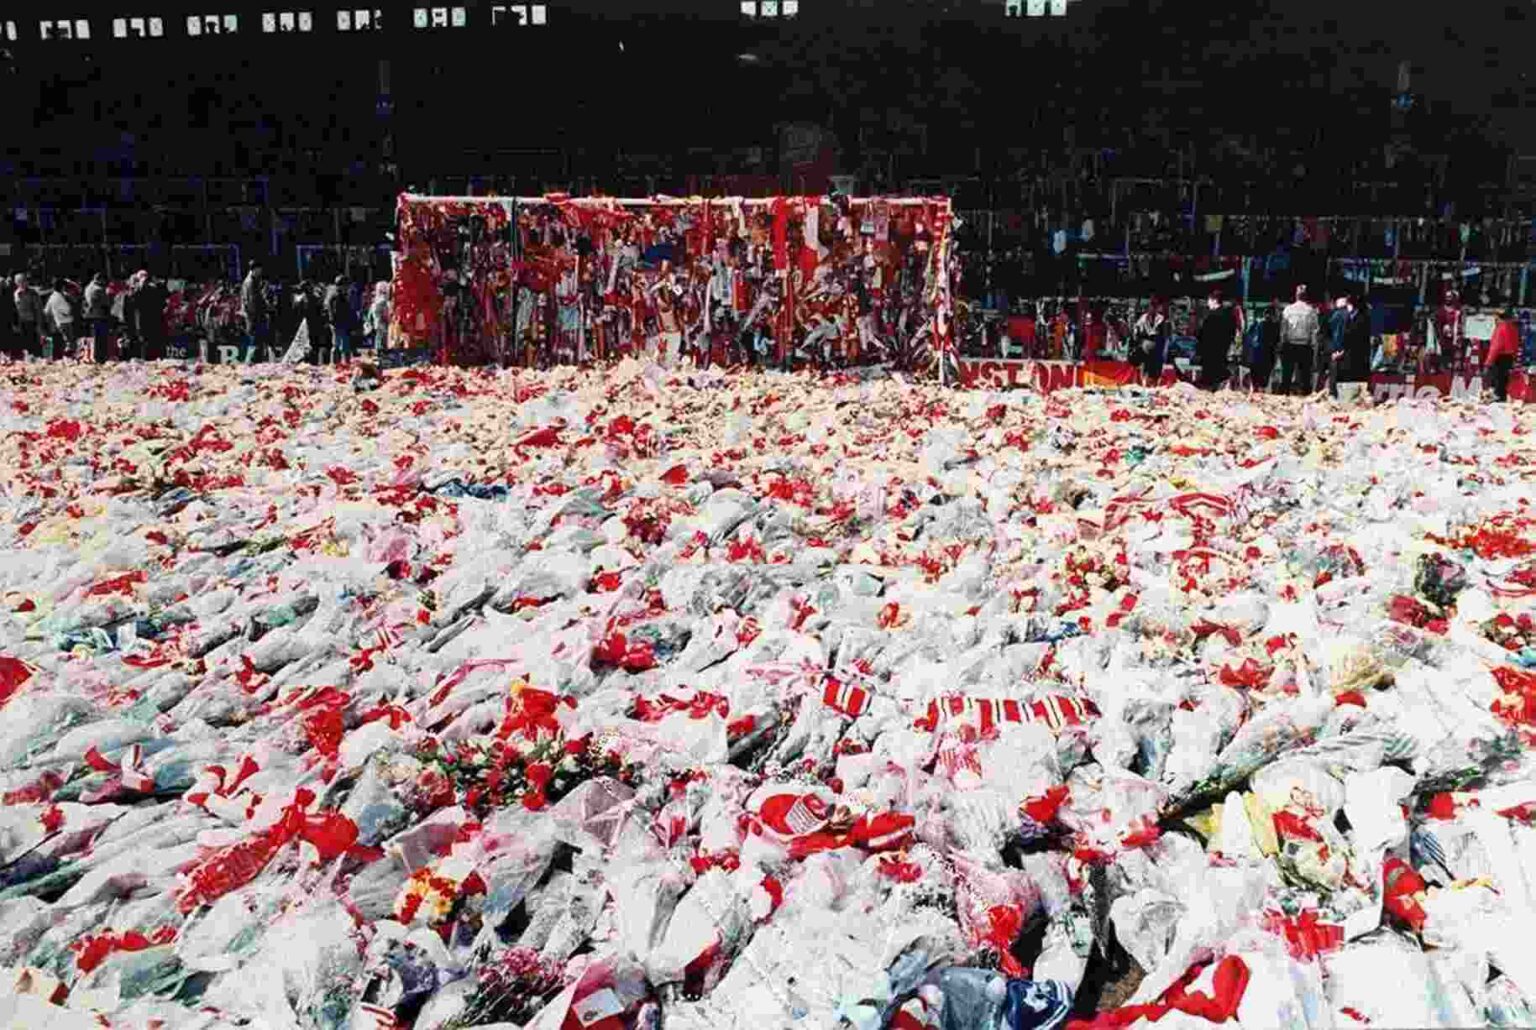 Government criticised for lack of response to Hillsborough report